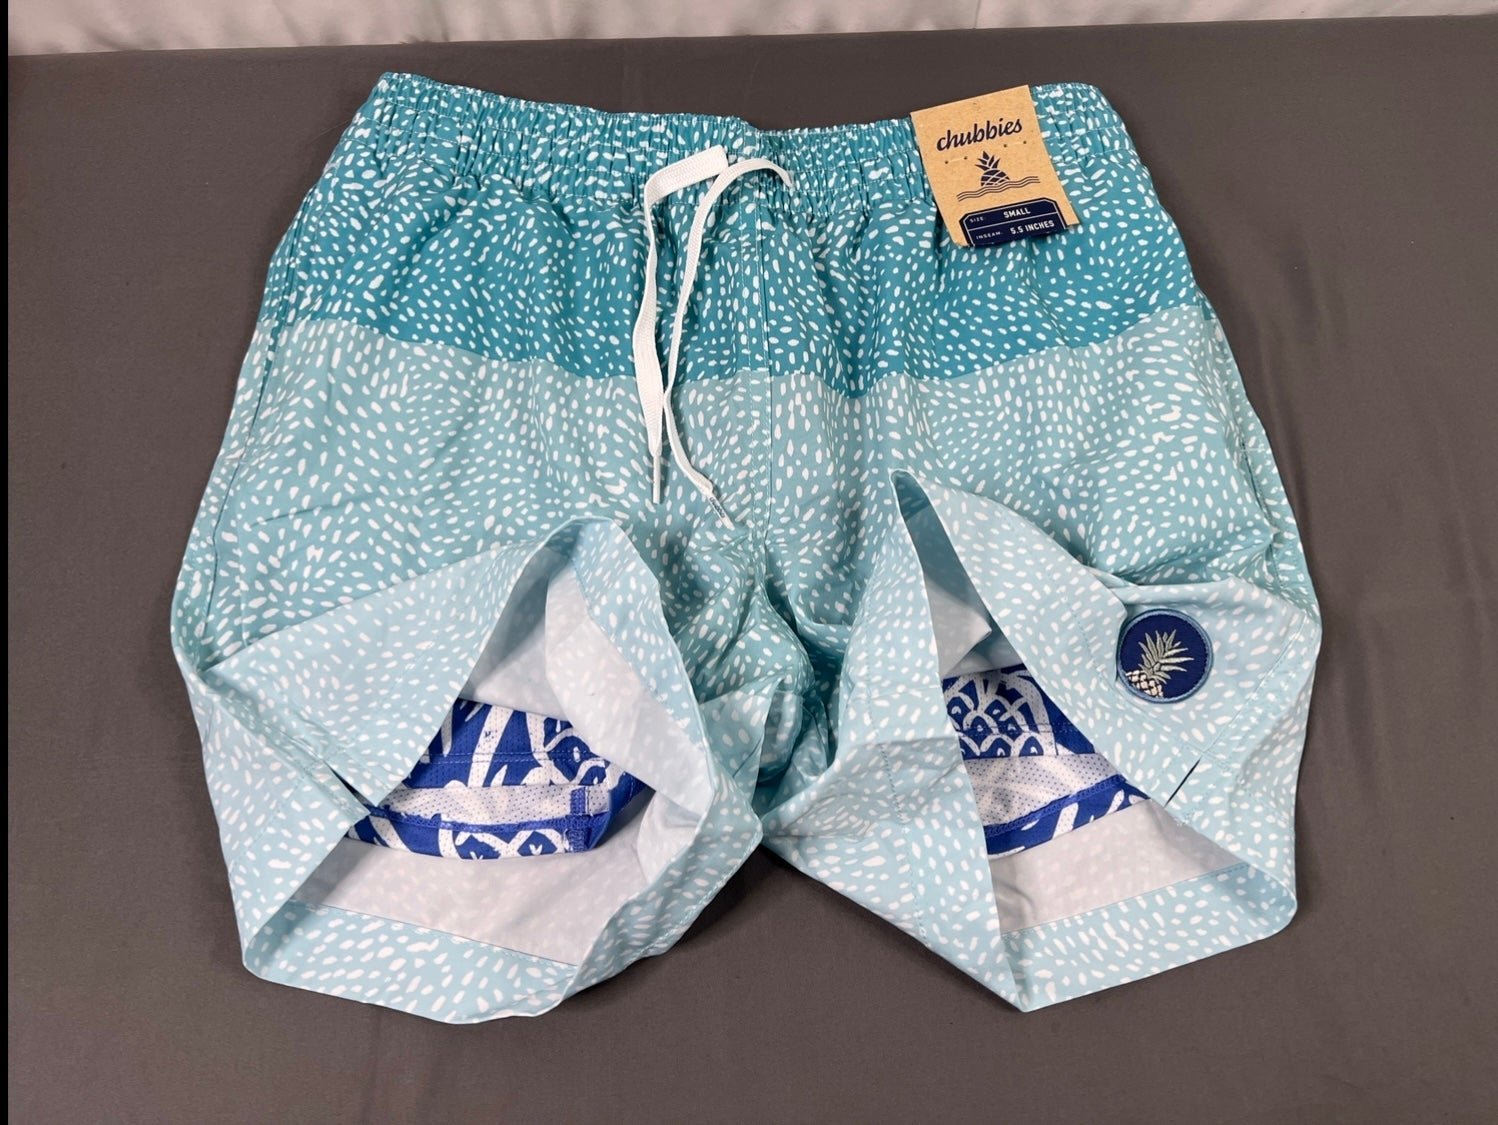 NWT Chubbies The Whale Sharks with Liner Swim Trunks 5.5” Medium N7XE0nFjt